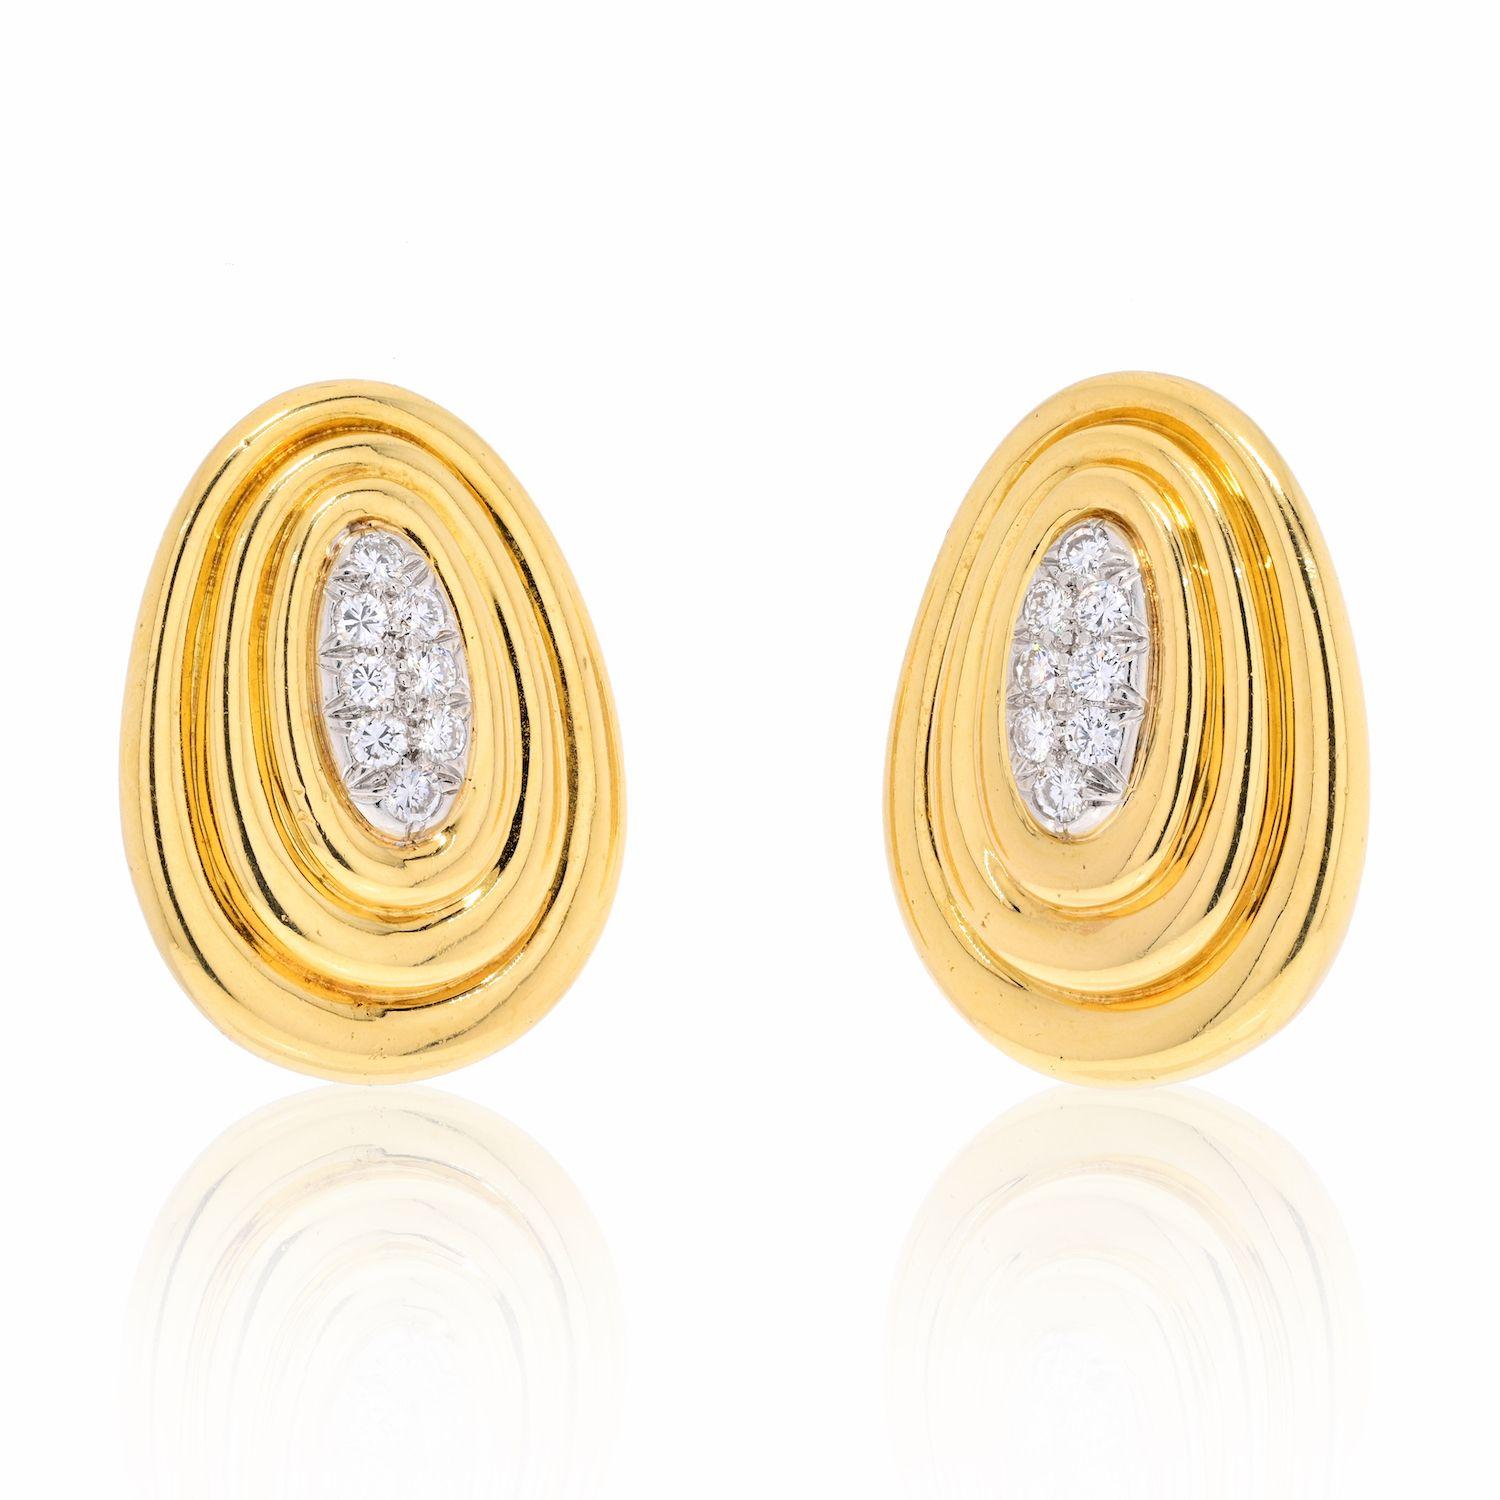 David Webb Platinum & 18K Yellow Gold Textured Gold And Diamond Earrings.
16 round cut diamonds in total weigh approx. 0.25cts. 
These earrings measure about 1.1 inches and fasten with a clip closure. 